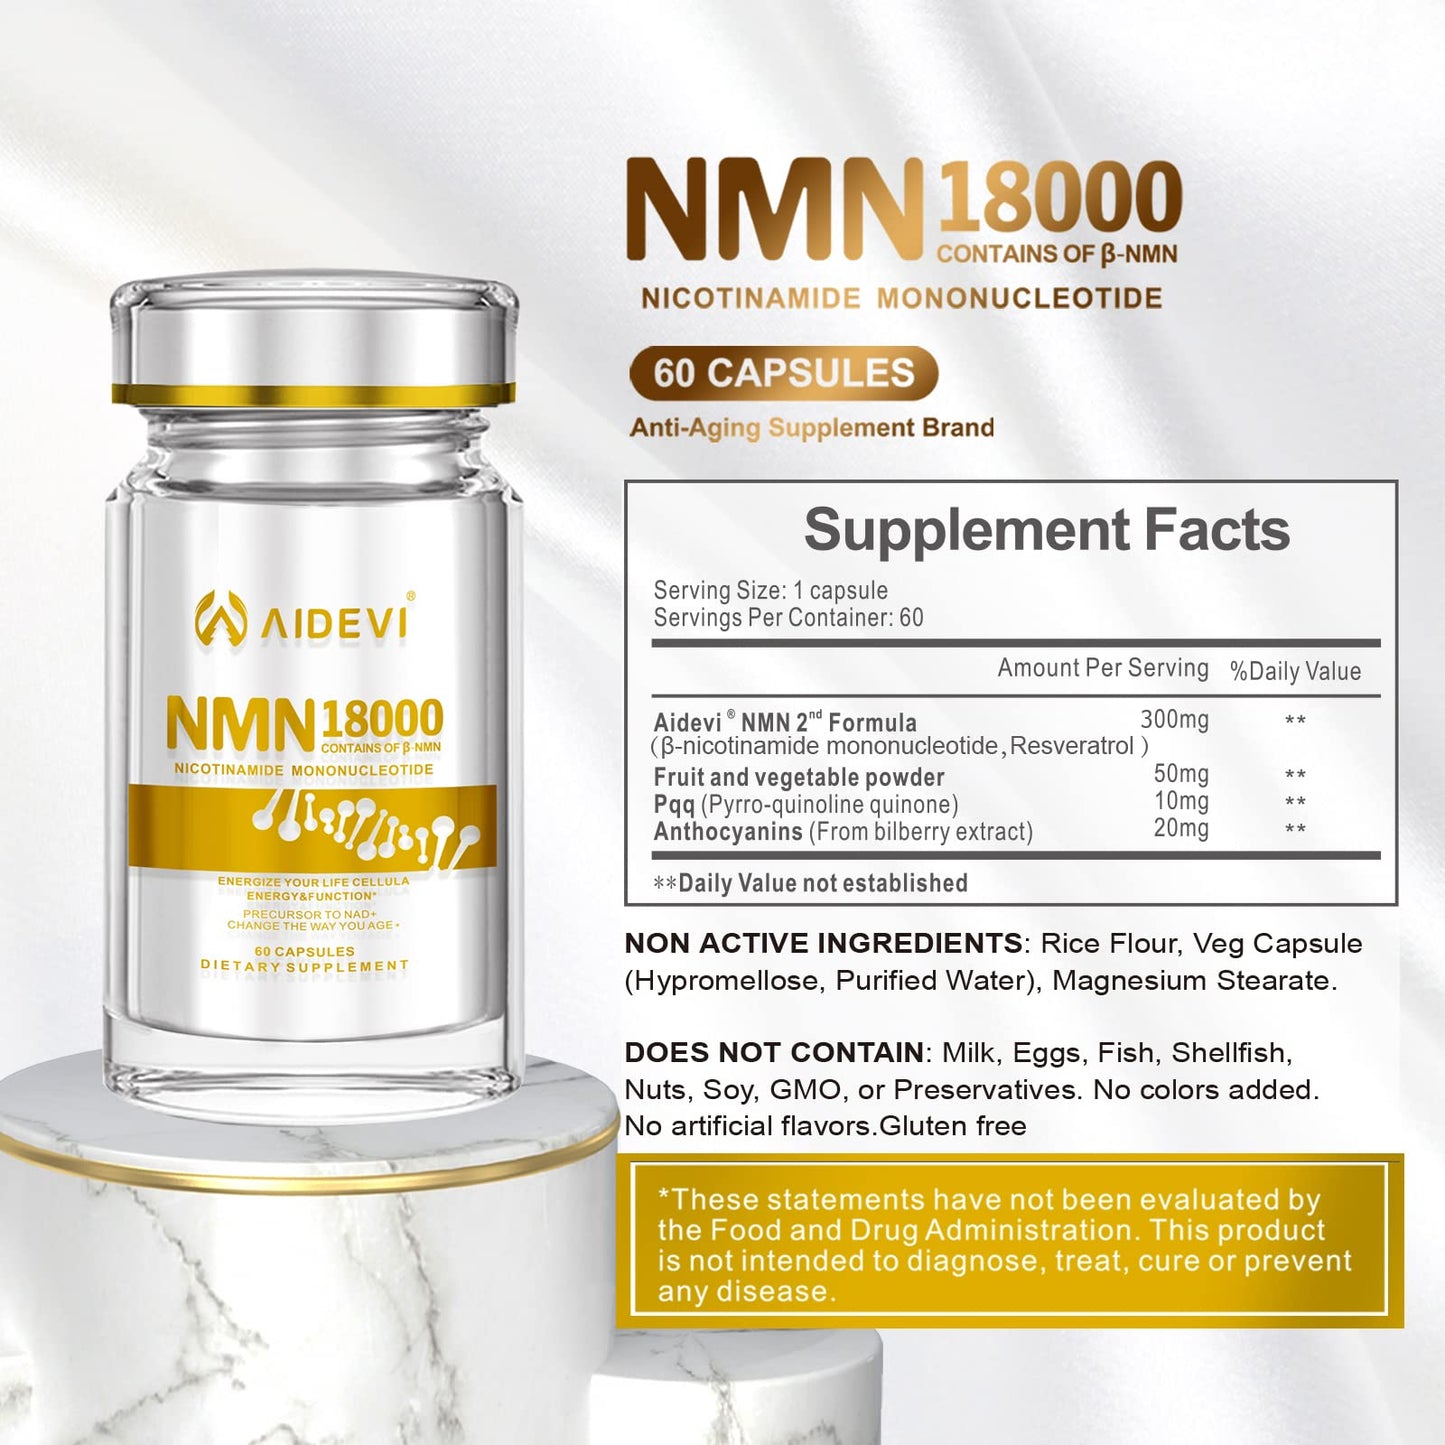 AIDEVI NMN 18000 - NMN Nicotinamide Mononucleotide Supplement with Resveratrol, Stabilized Form & 99% High Purity to Boost NAD+ Levels for DNA Repair Supplement,for Healthy Aging ,60 Capsules